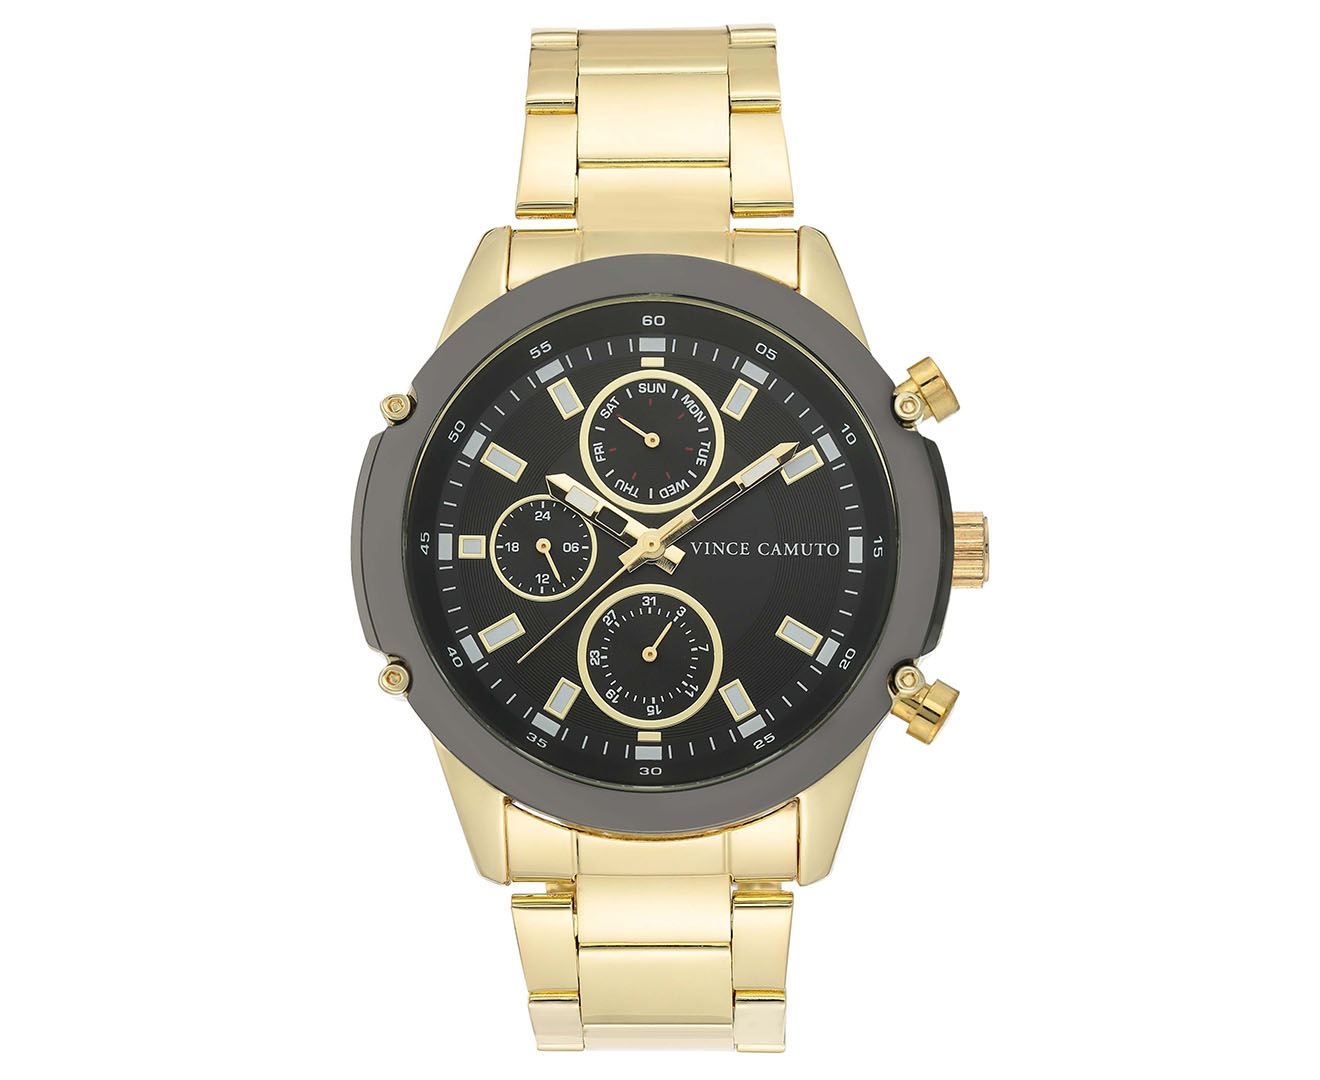 Vince Camuto Men's 46mm VC1135BKGP Stainless Steel Watch - Black/Gold ...